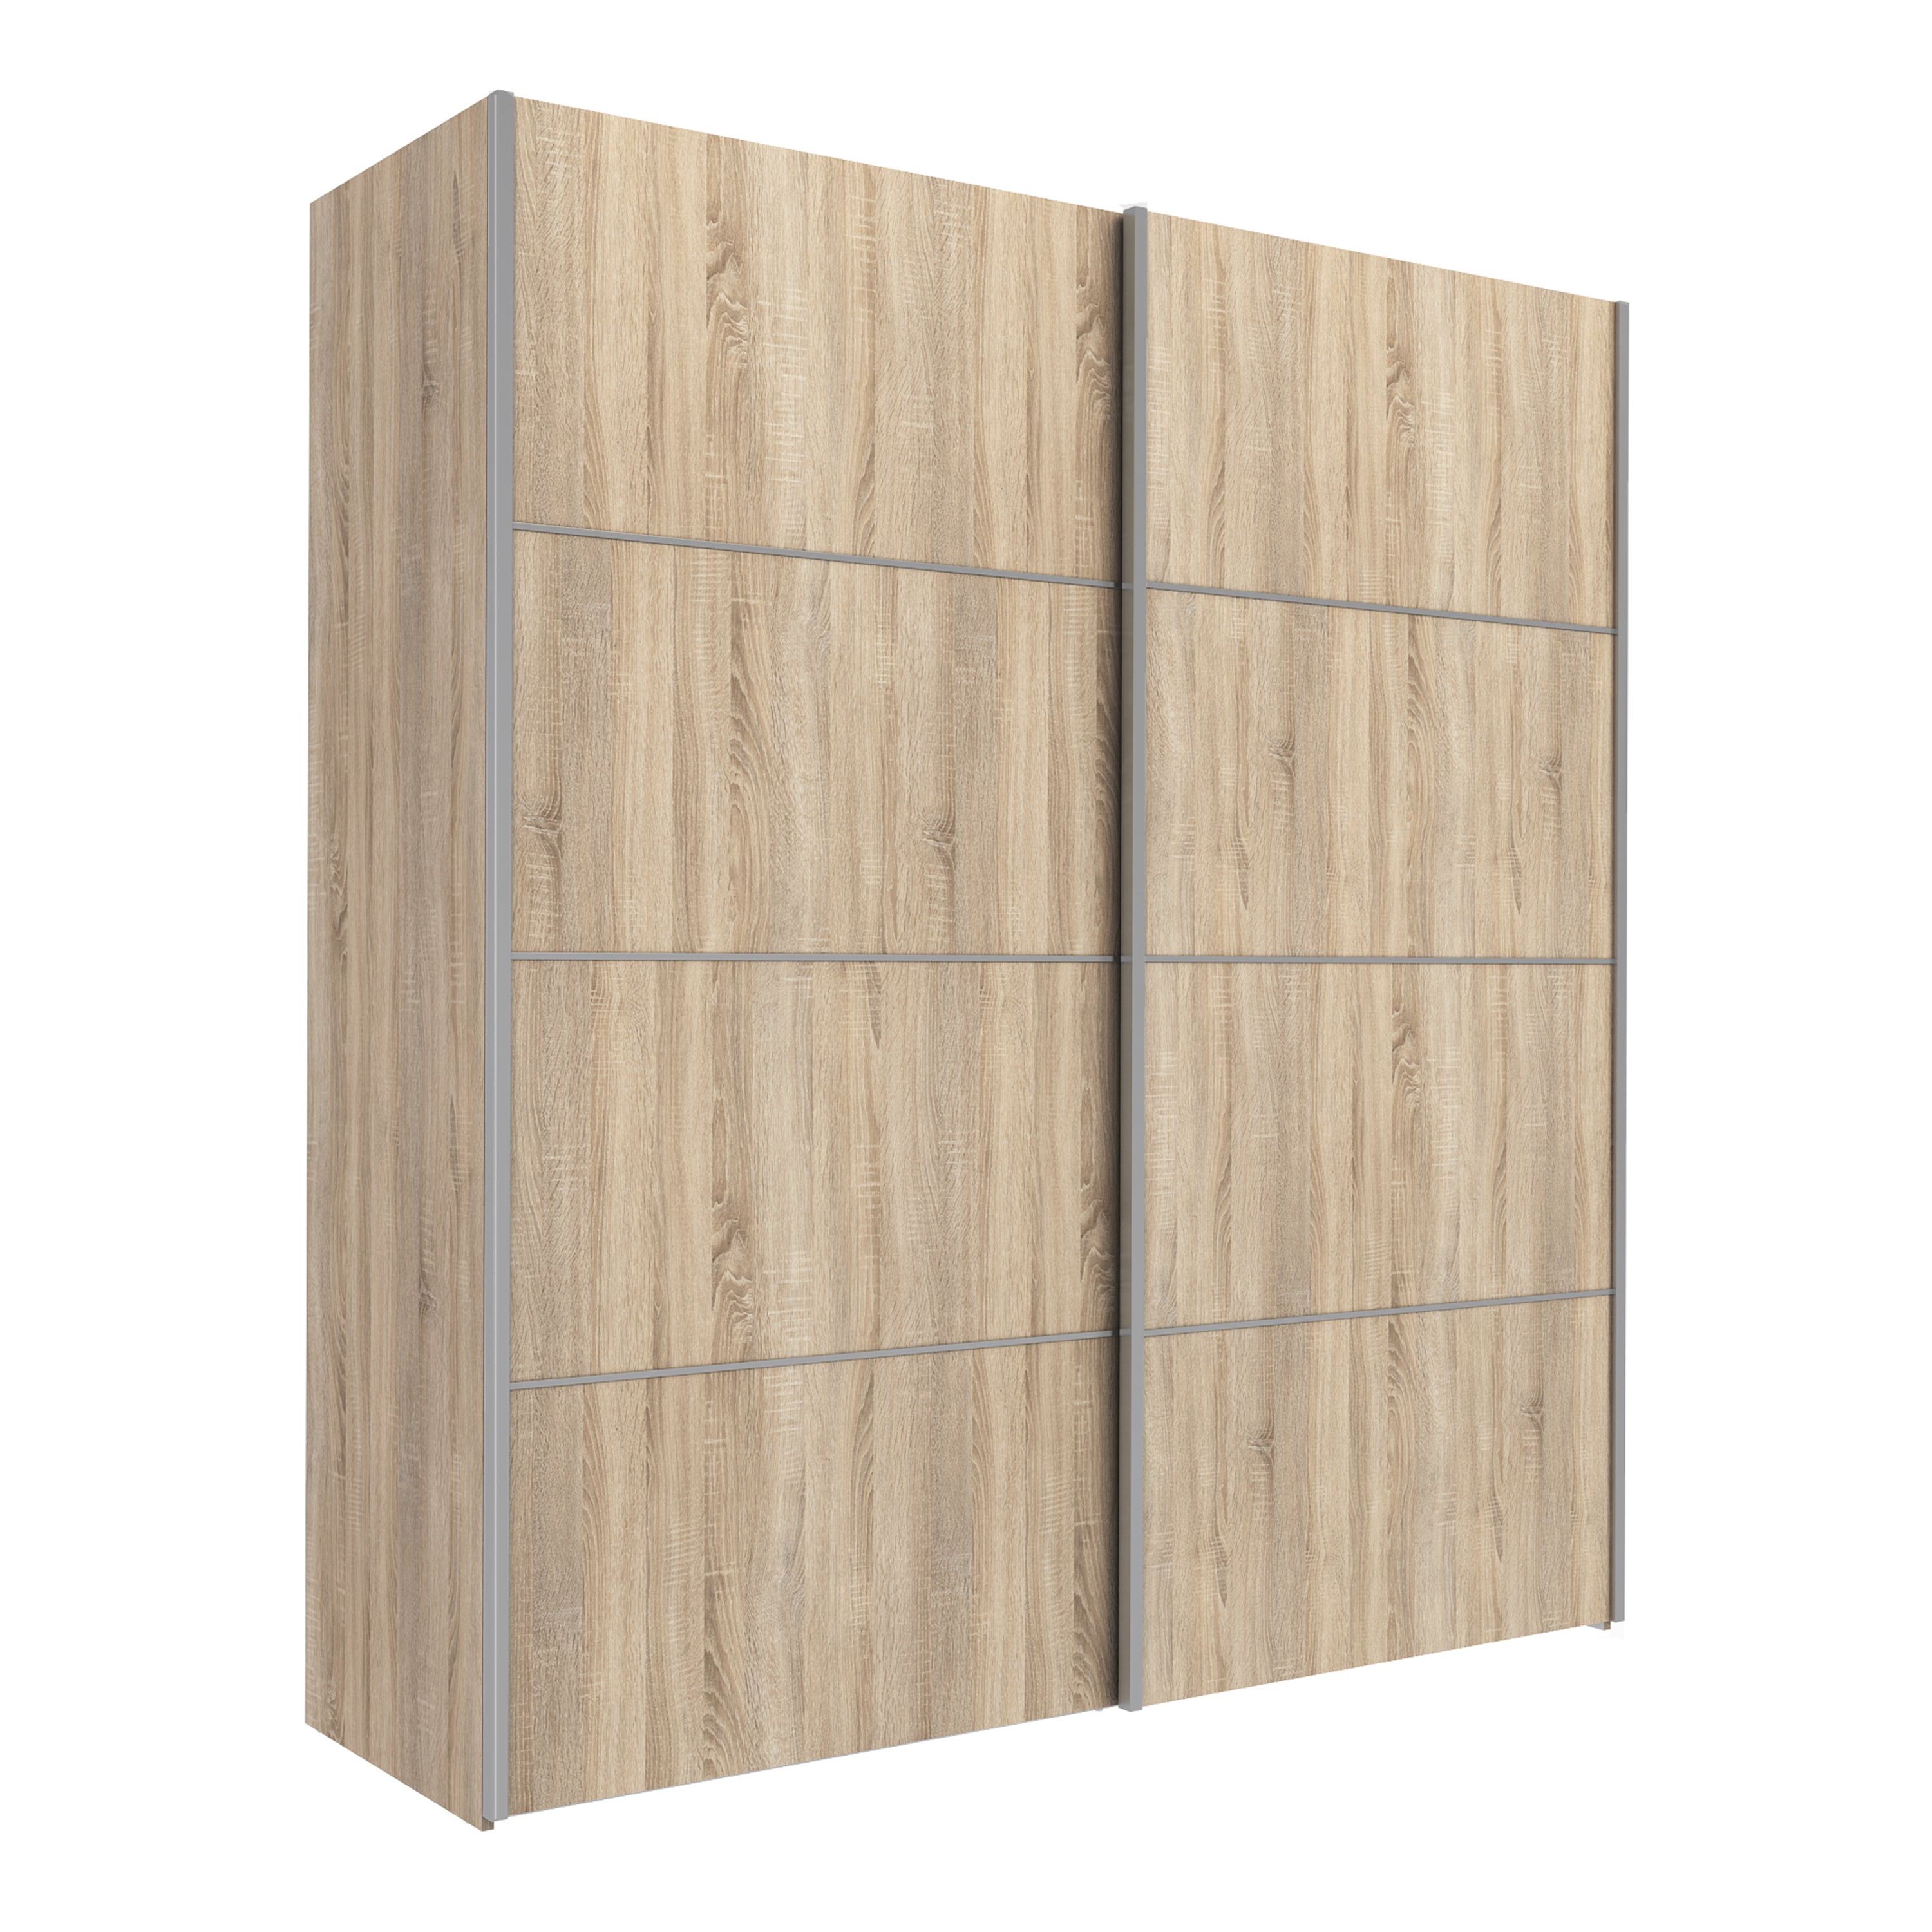 Image of Verona Sliding Wardrobe With 2 Shelves 180cm - Available In 6 Colours